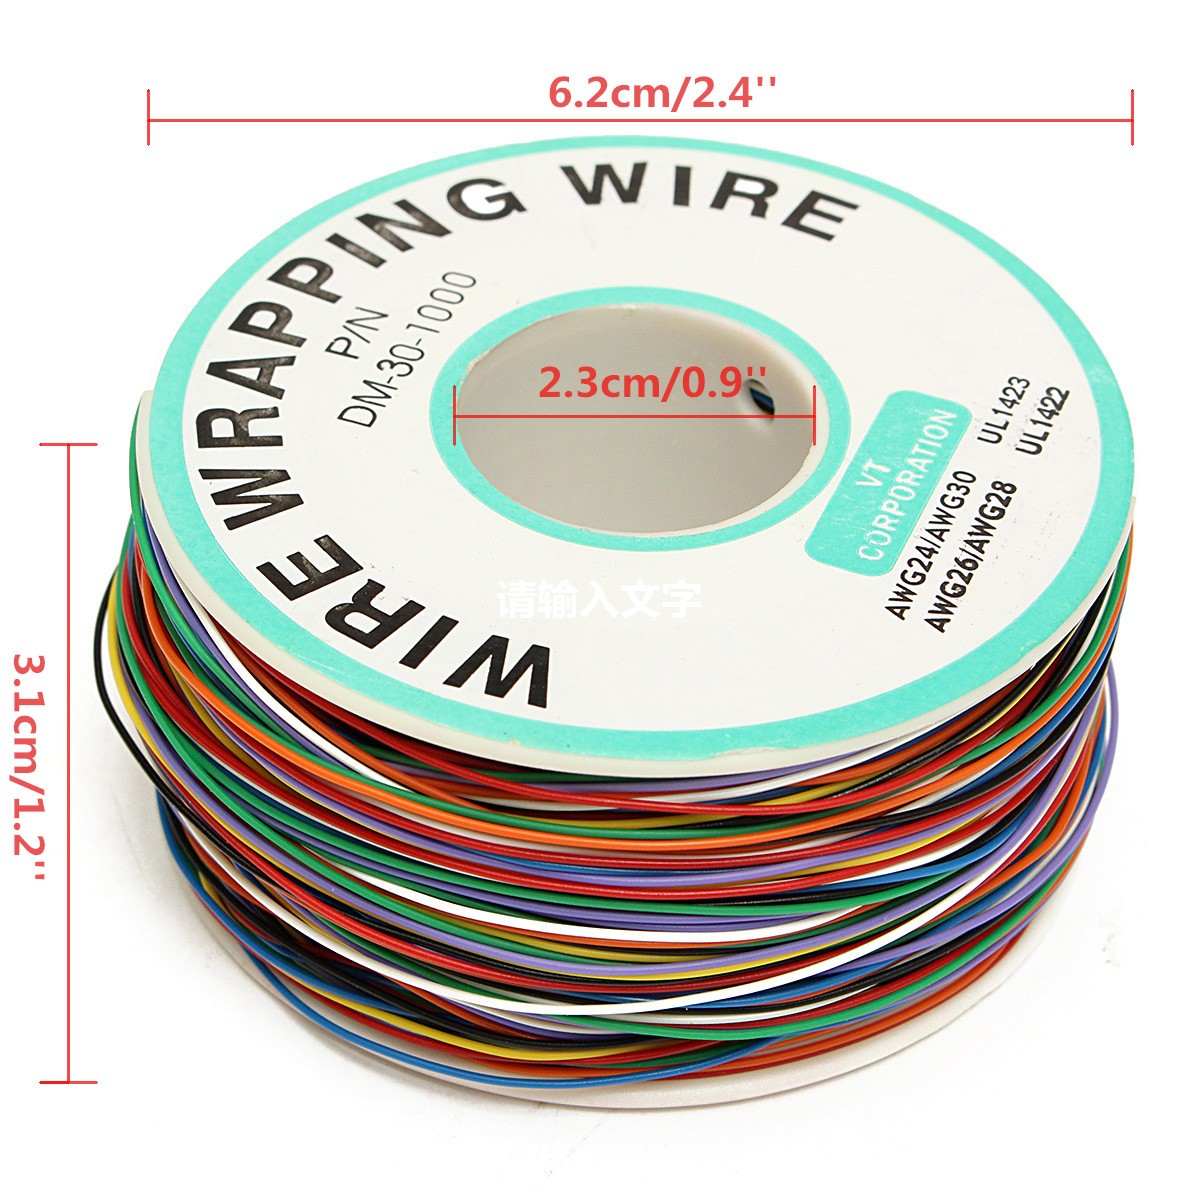 DANIU-250M-8-Wire-Colored-Insulated-PN-B-30-1000-30AWG-Wire-Wrapping-Cable-Wrap-Reel-1081298-10